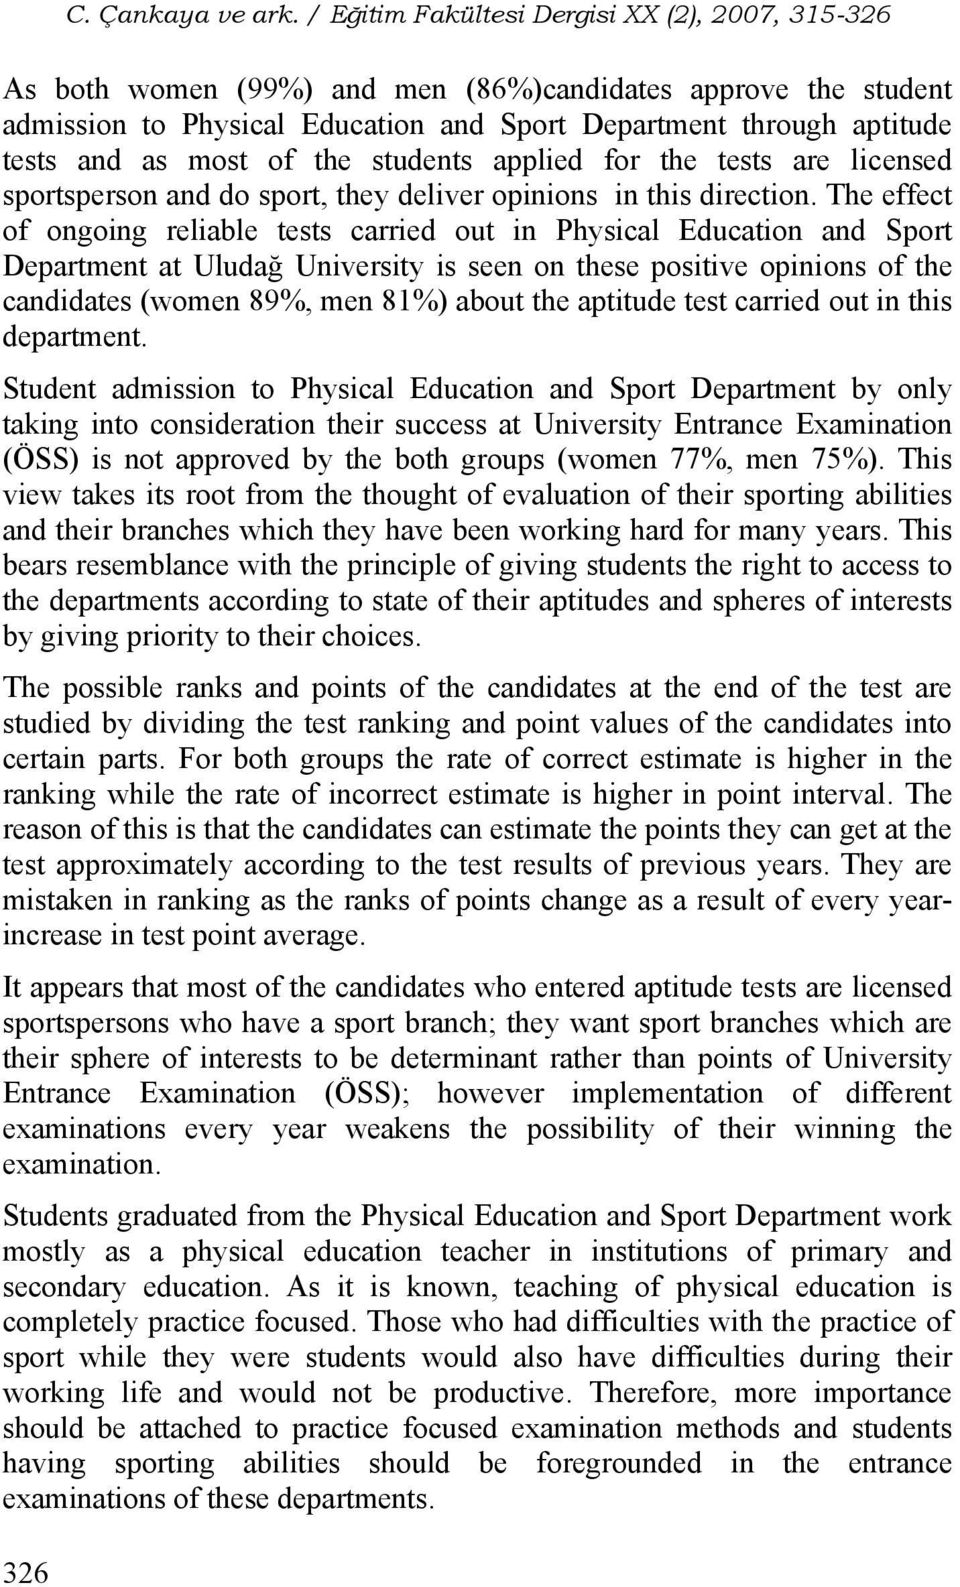 of the students applied for the tests are licensed sportsperson and do sport, they deliver opinions in this direction.